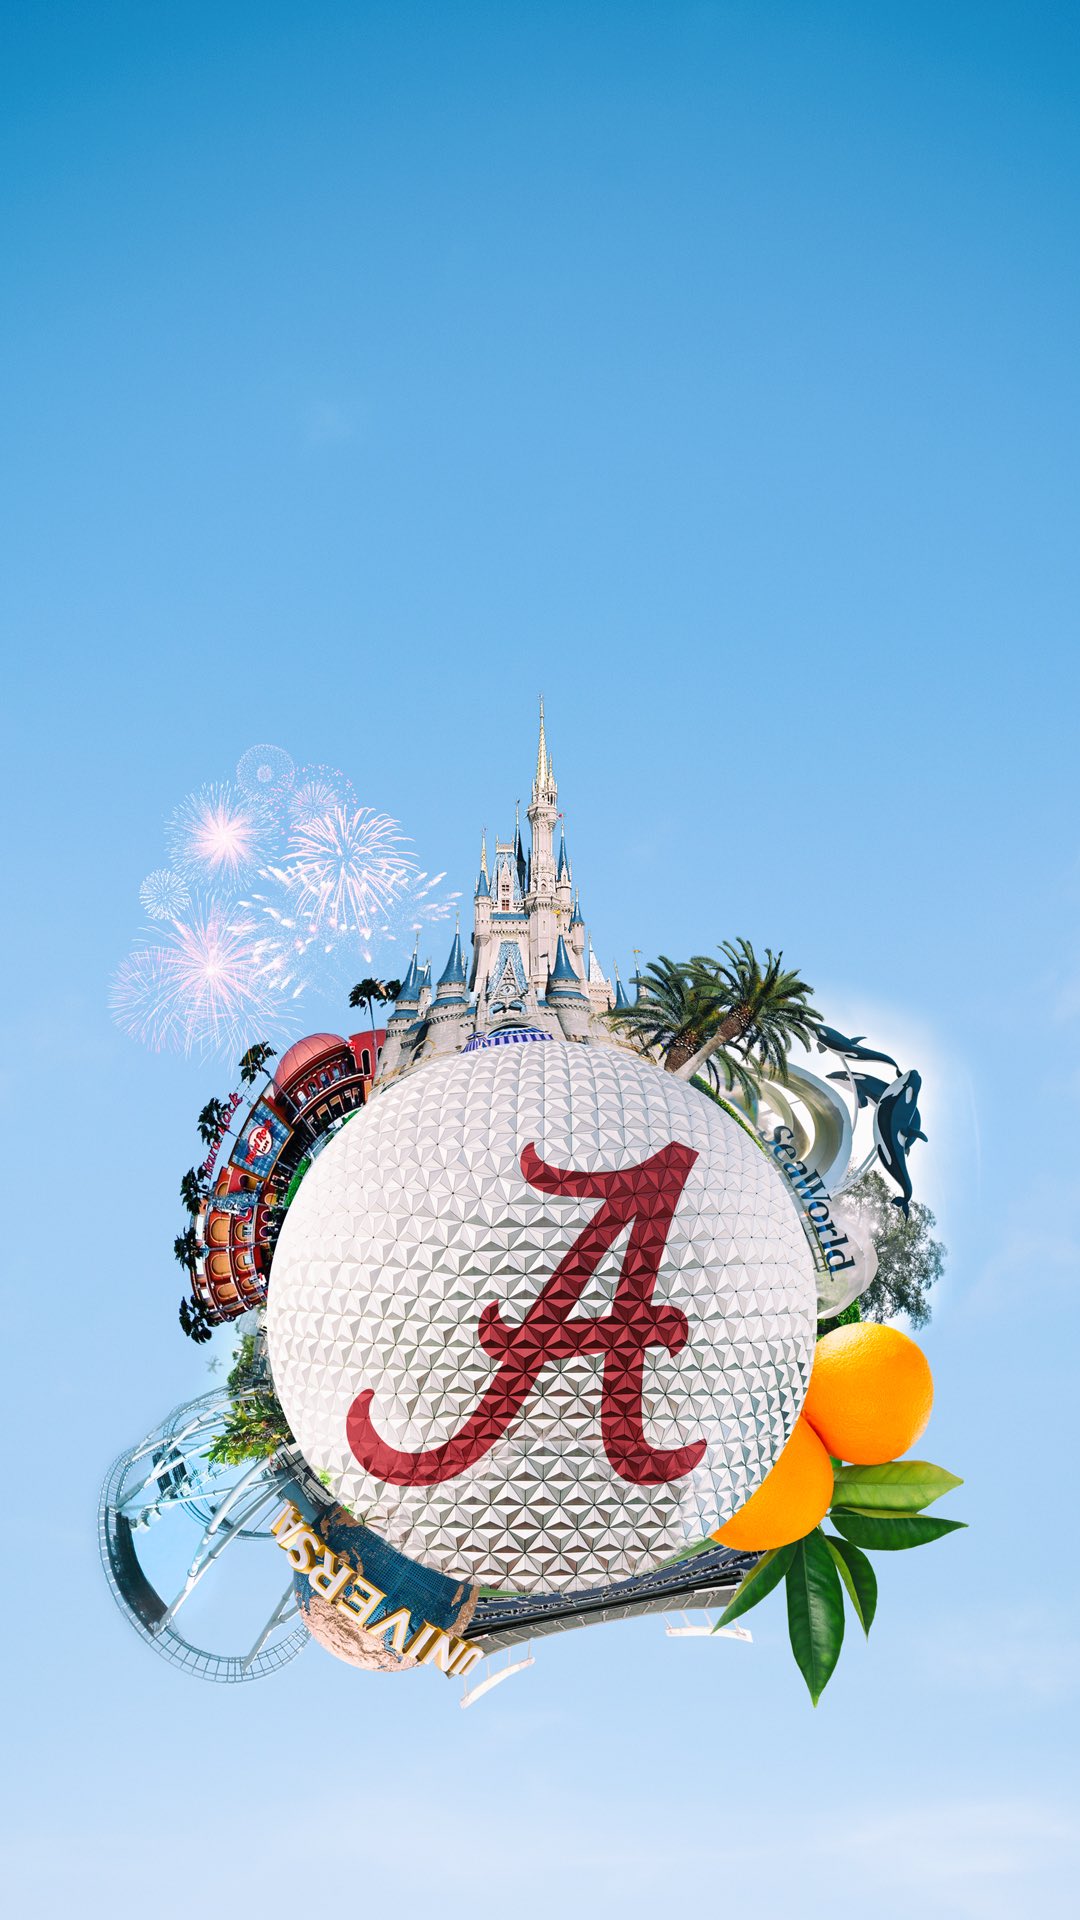 Alabama iPhone wallpaper by JammerKitchens  Download on ZEDGE  1a83